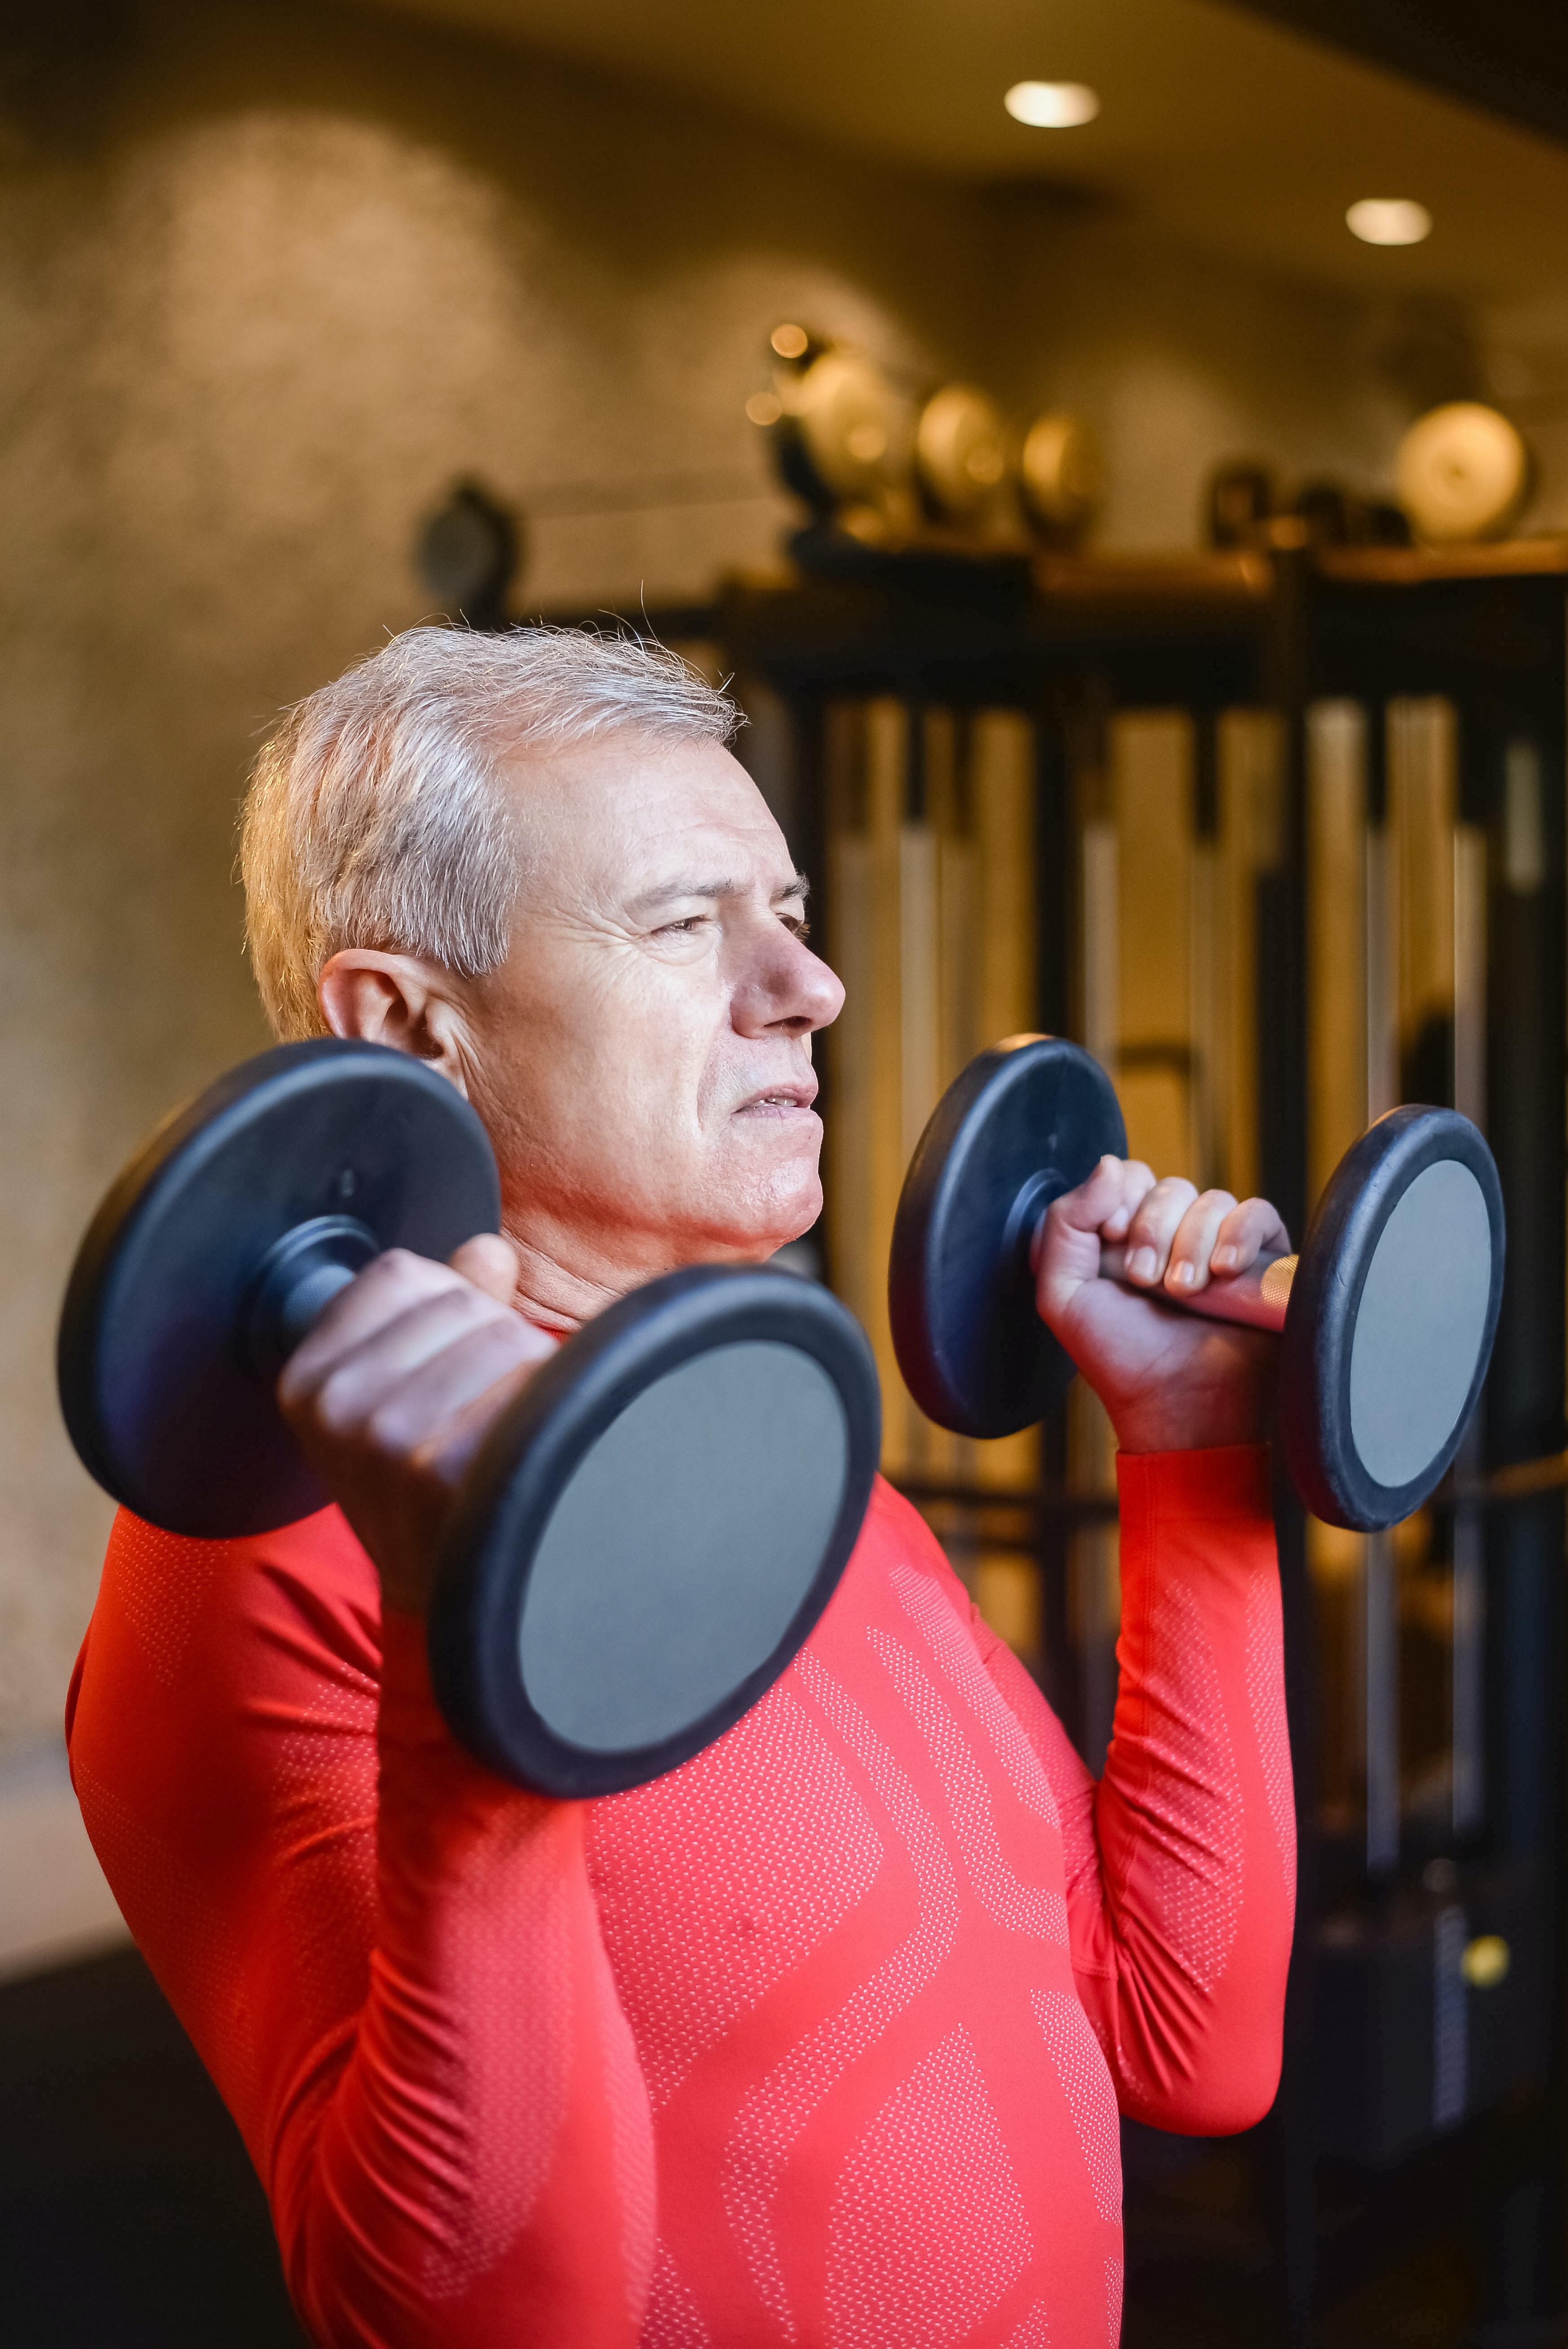  How Many Times A Week Should Seniors Lift Weights 